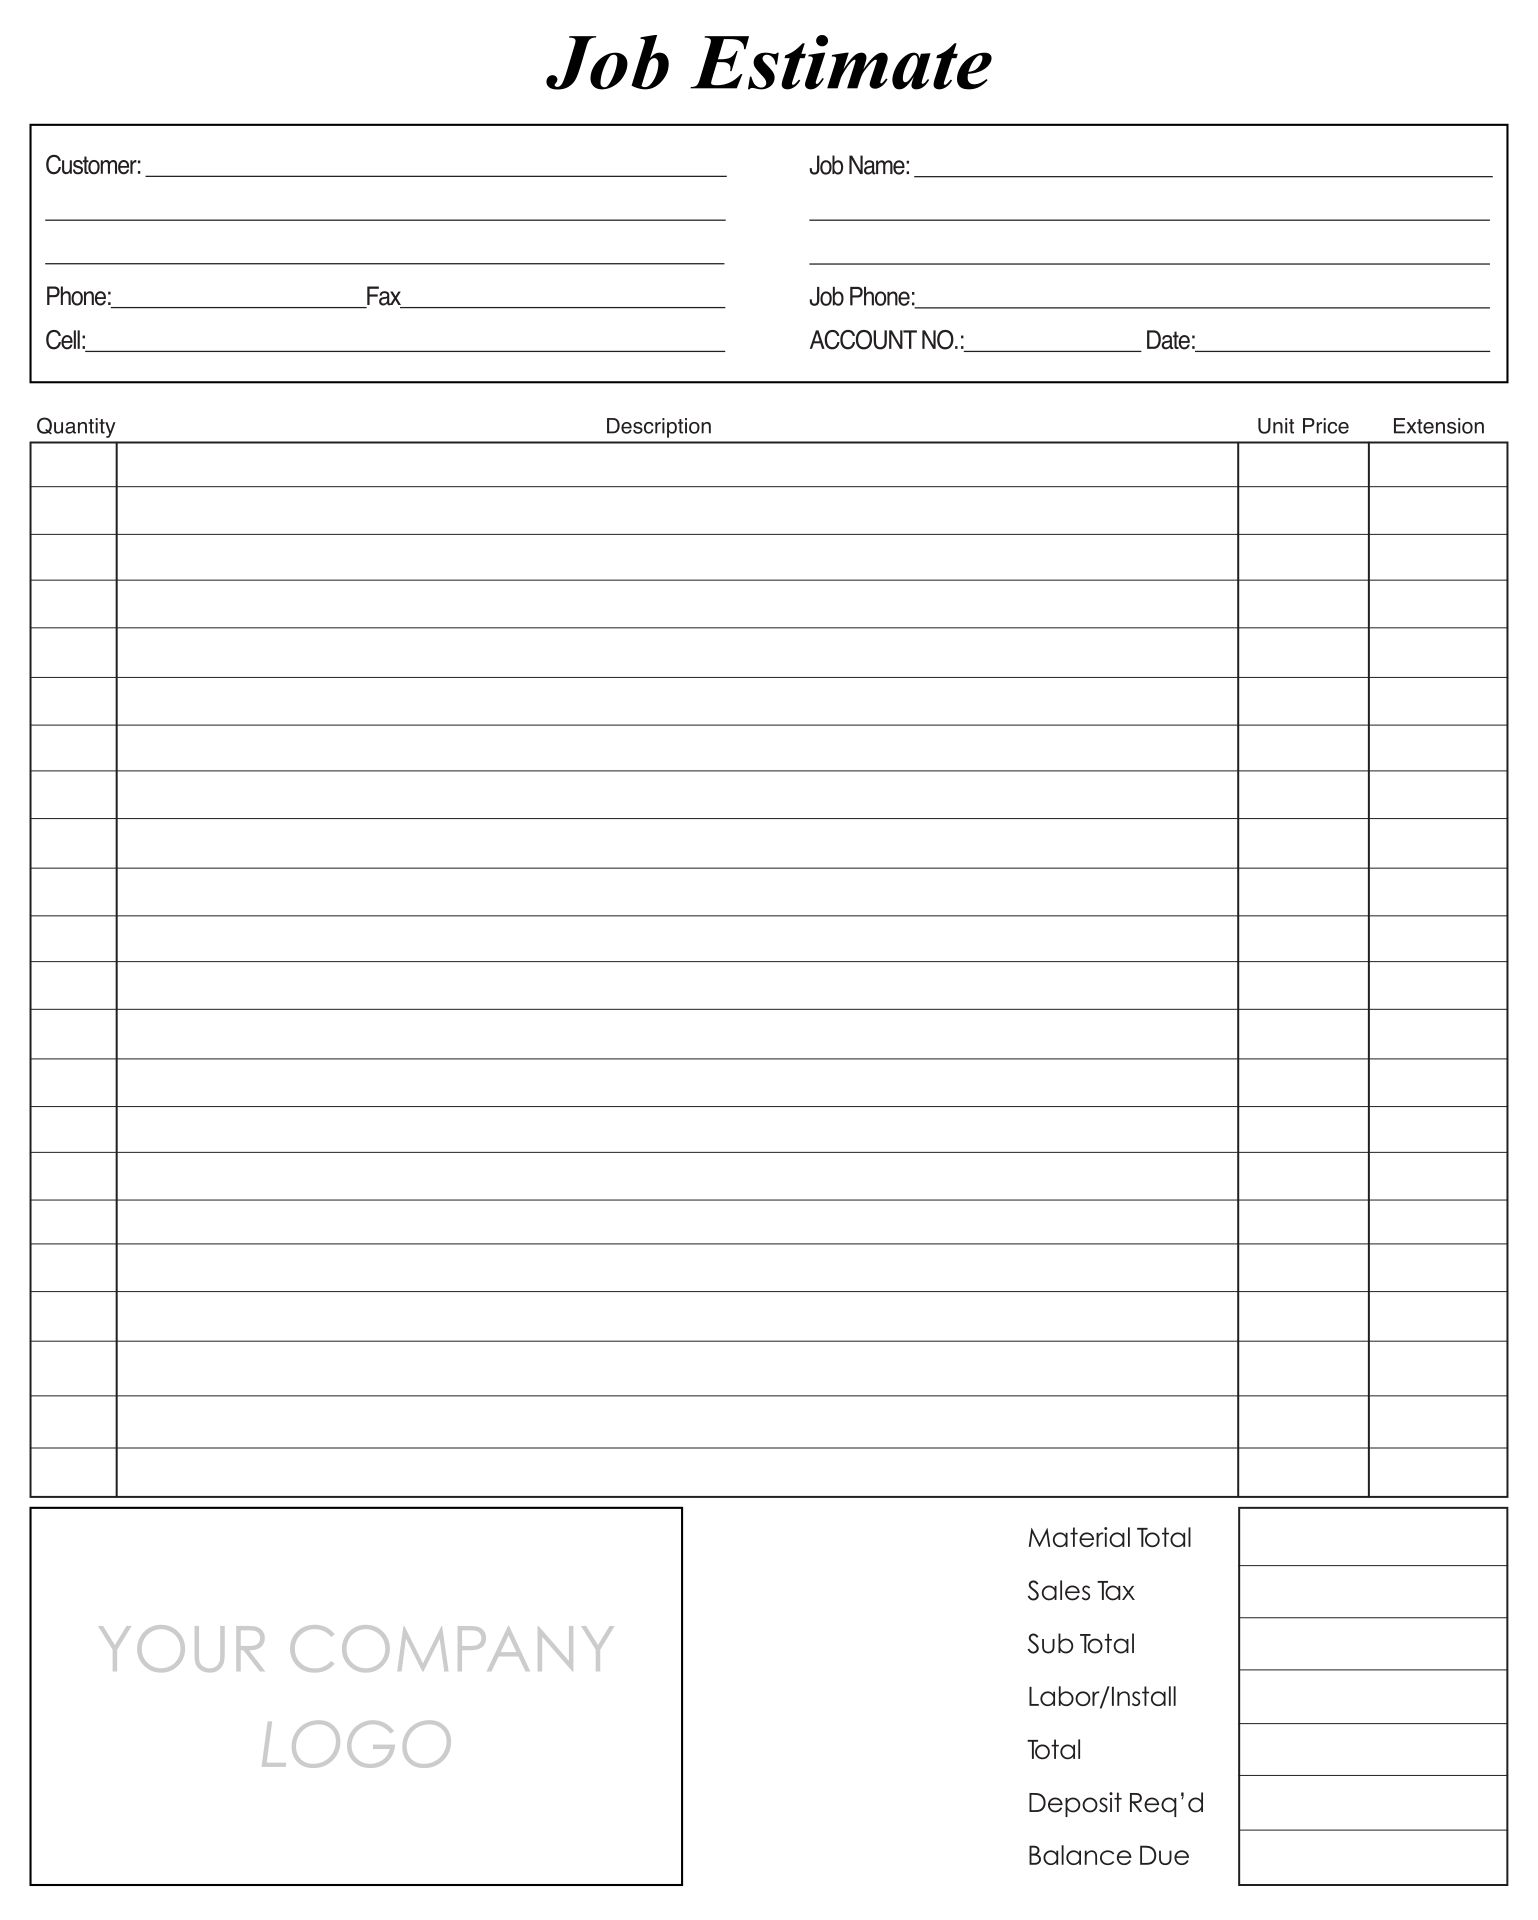 printable-roof-estimate-forms-printable-forms-free-online